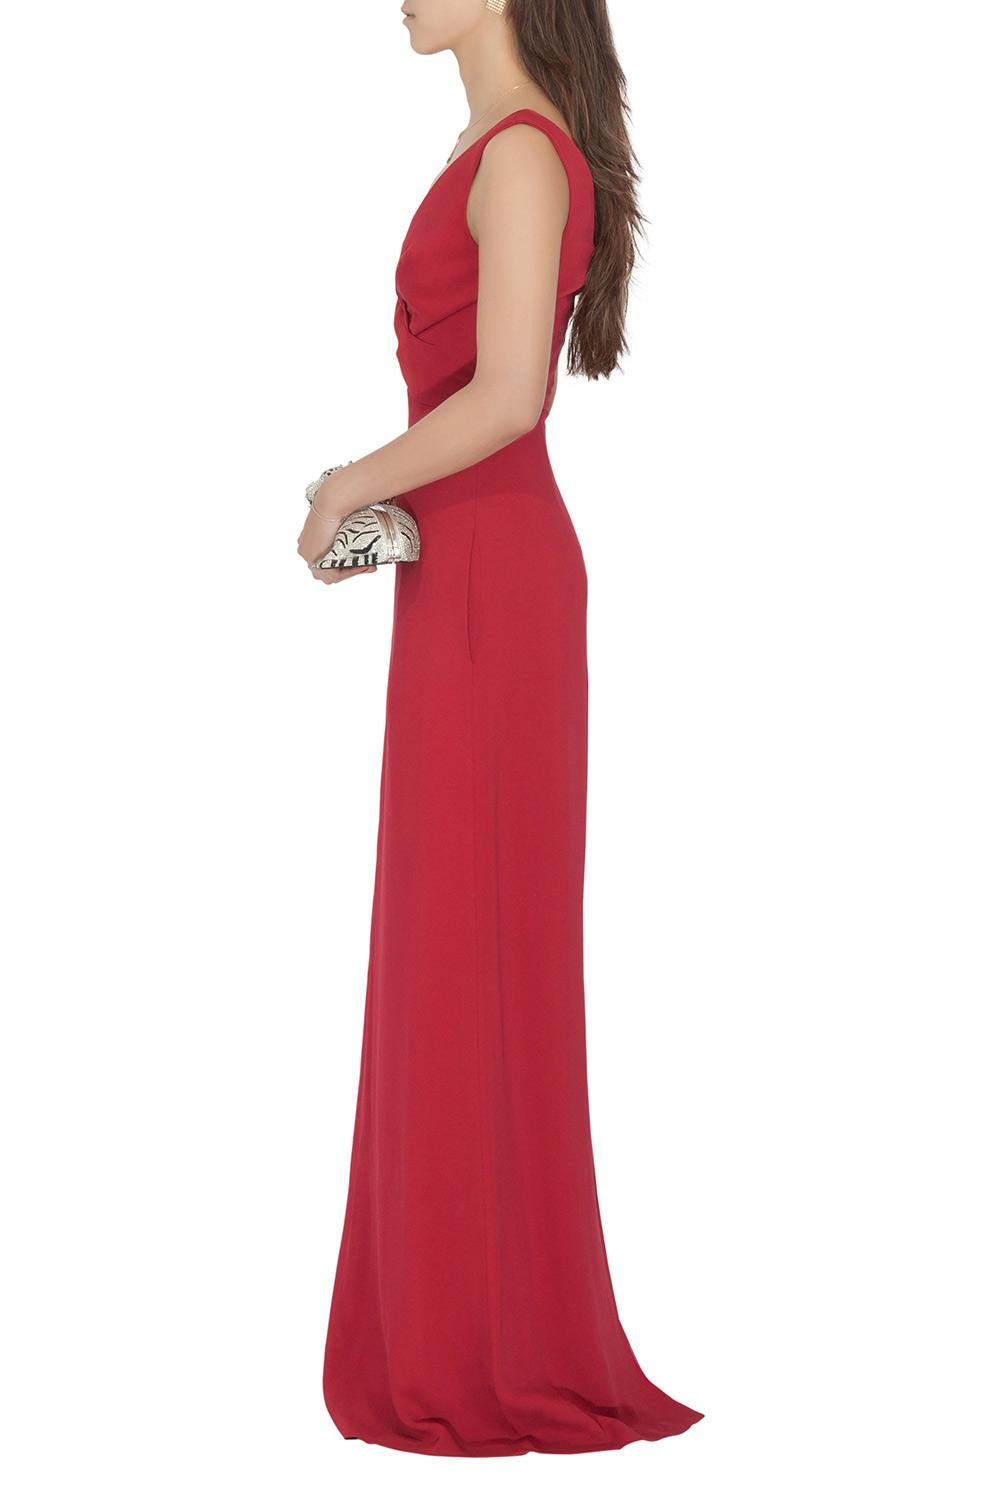 Designed with a criss-cross pleated bodice, this sleeveless gown comes in red color. Walk like a diva in this brilliant creation tailored from a fine fabric blend. Derek Lam has precisely made this gown to complement your personality in the most